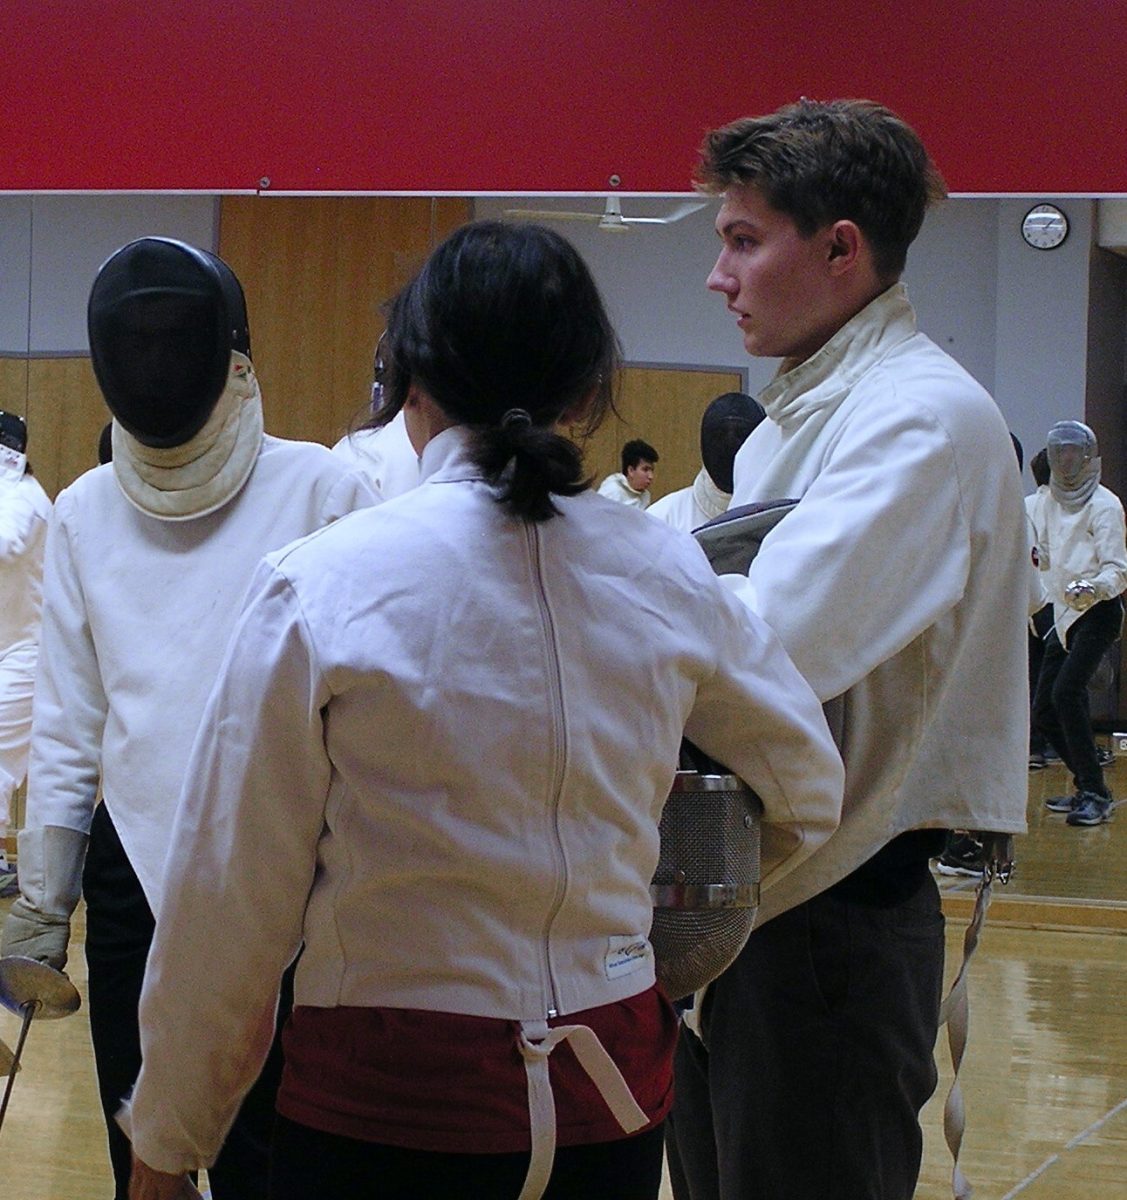 Angela Nyam-Ochir, president of Fencing Club, gives instructions to members on what skills to focus on and practice in Monday night’s meeting. (Josephine Dunmore | Northern Star)